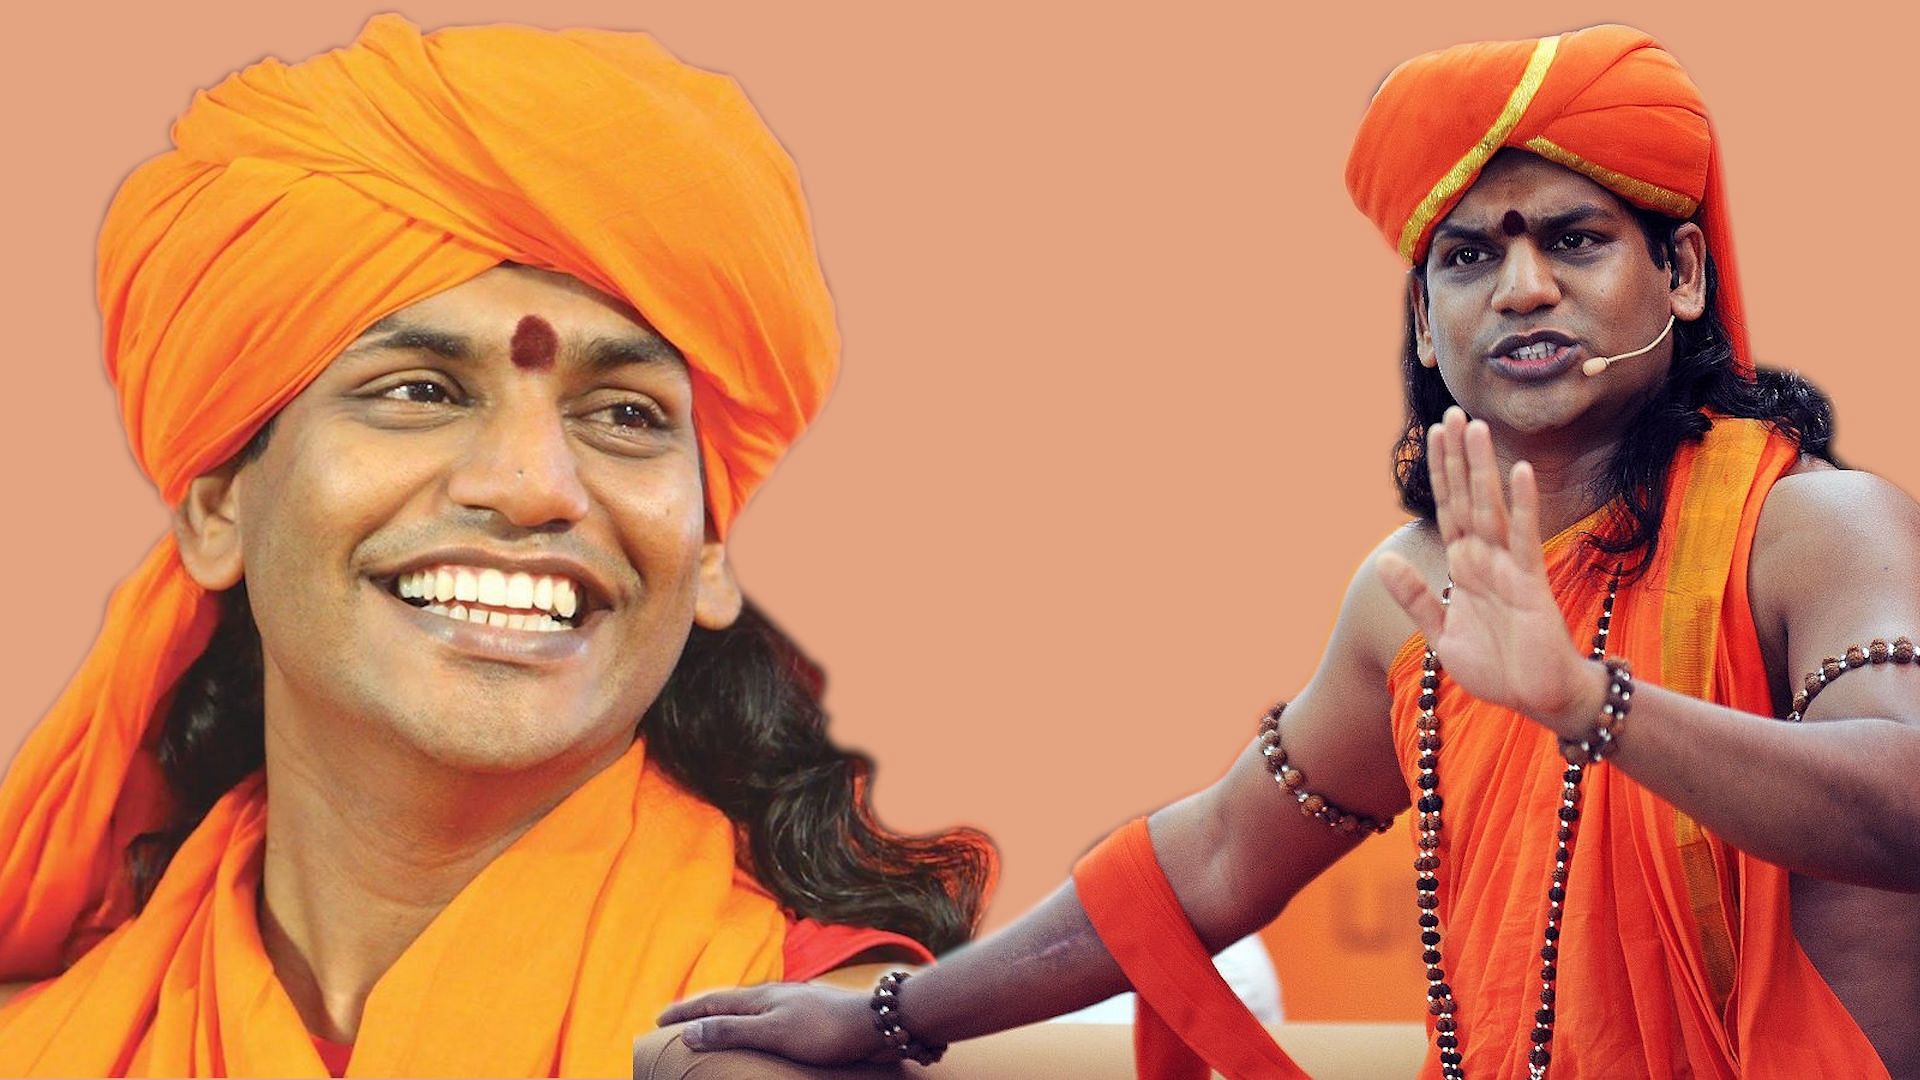 Overnight, ‘swami’ Nithyananda became a ‘sex swami’ after alleged rape and sexual abuse cases against him.